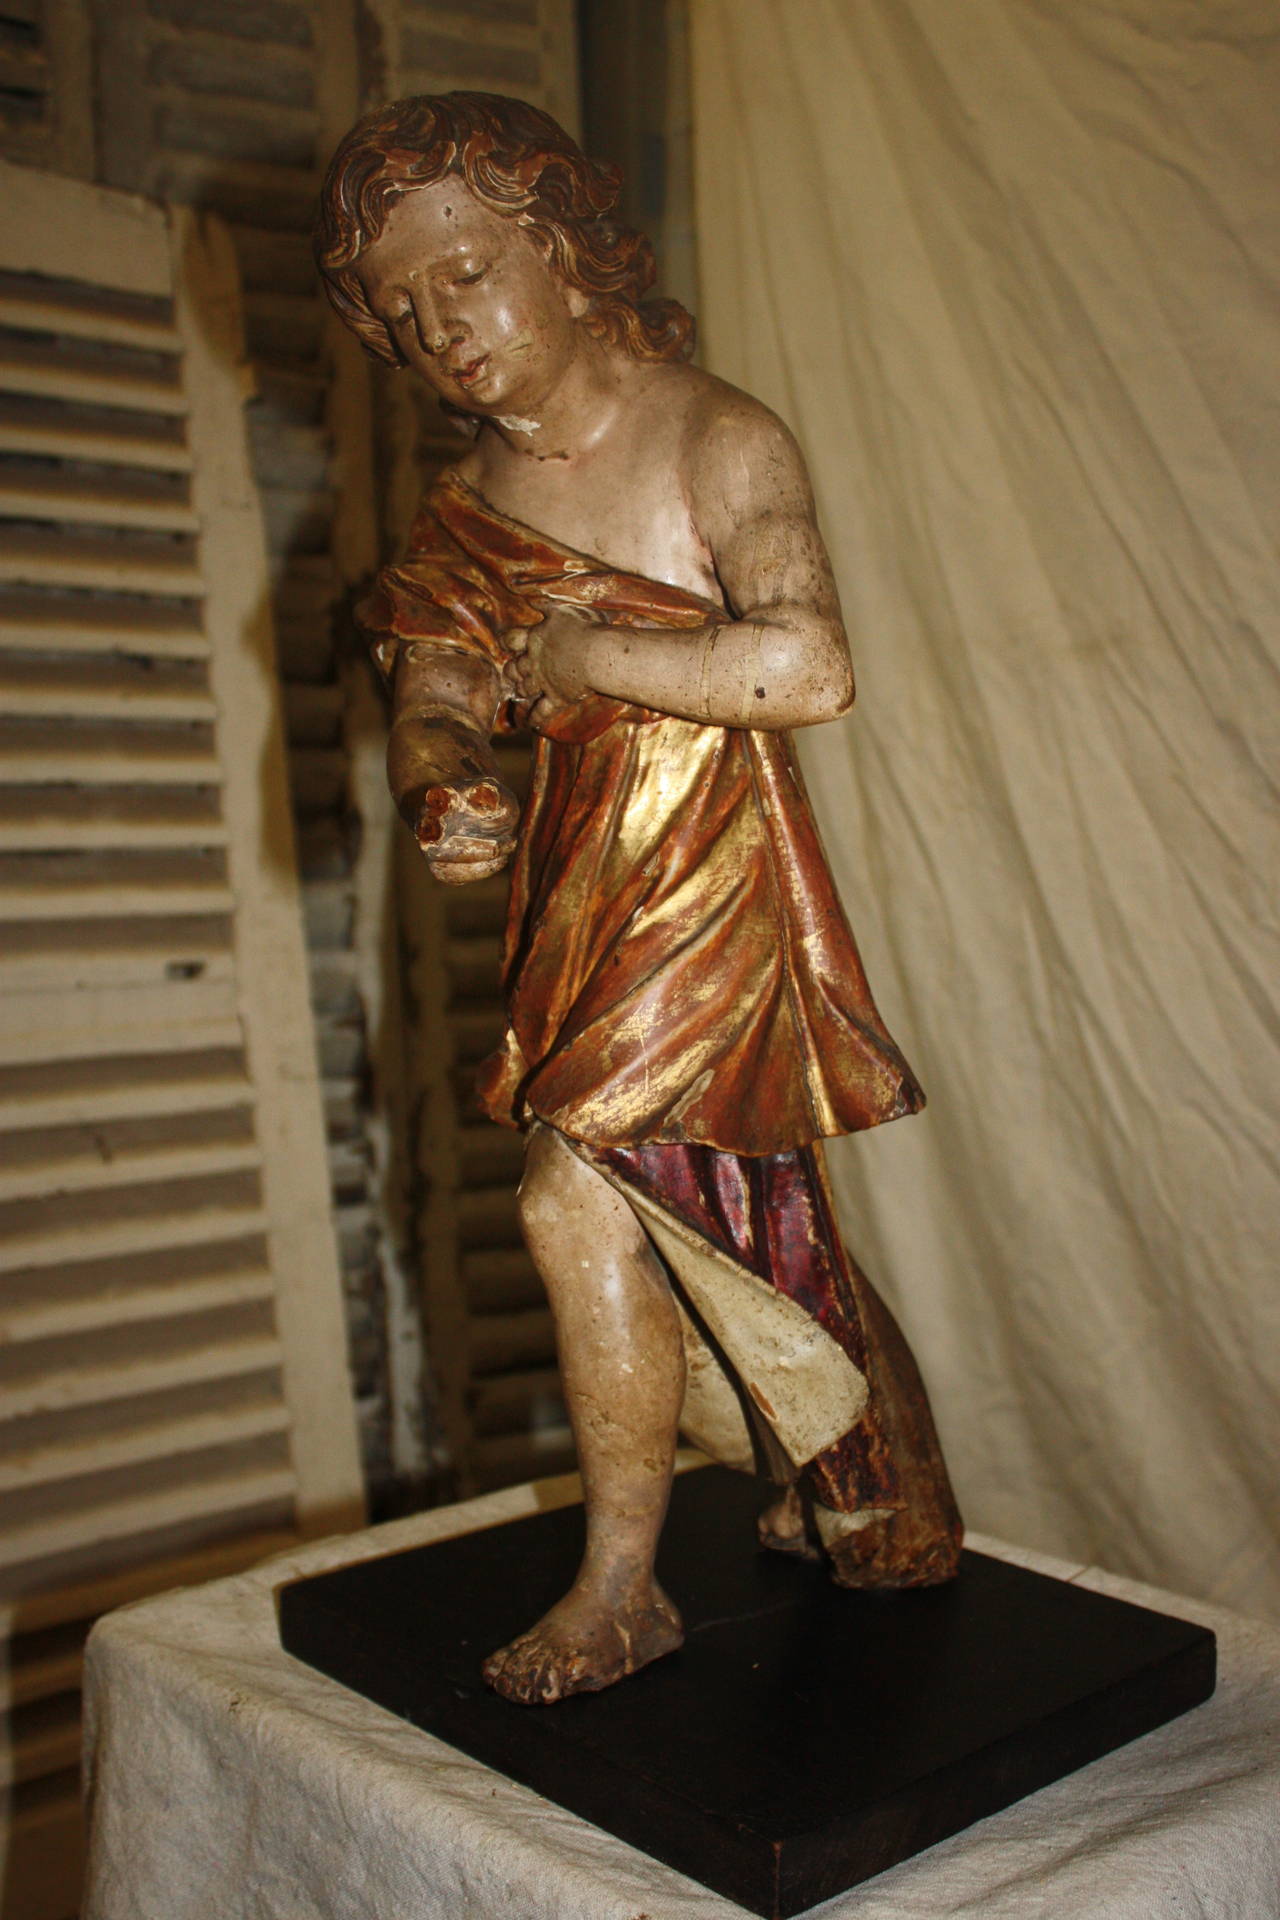 Early 18th century sculpture 